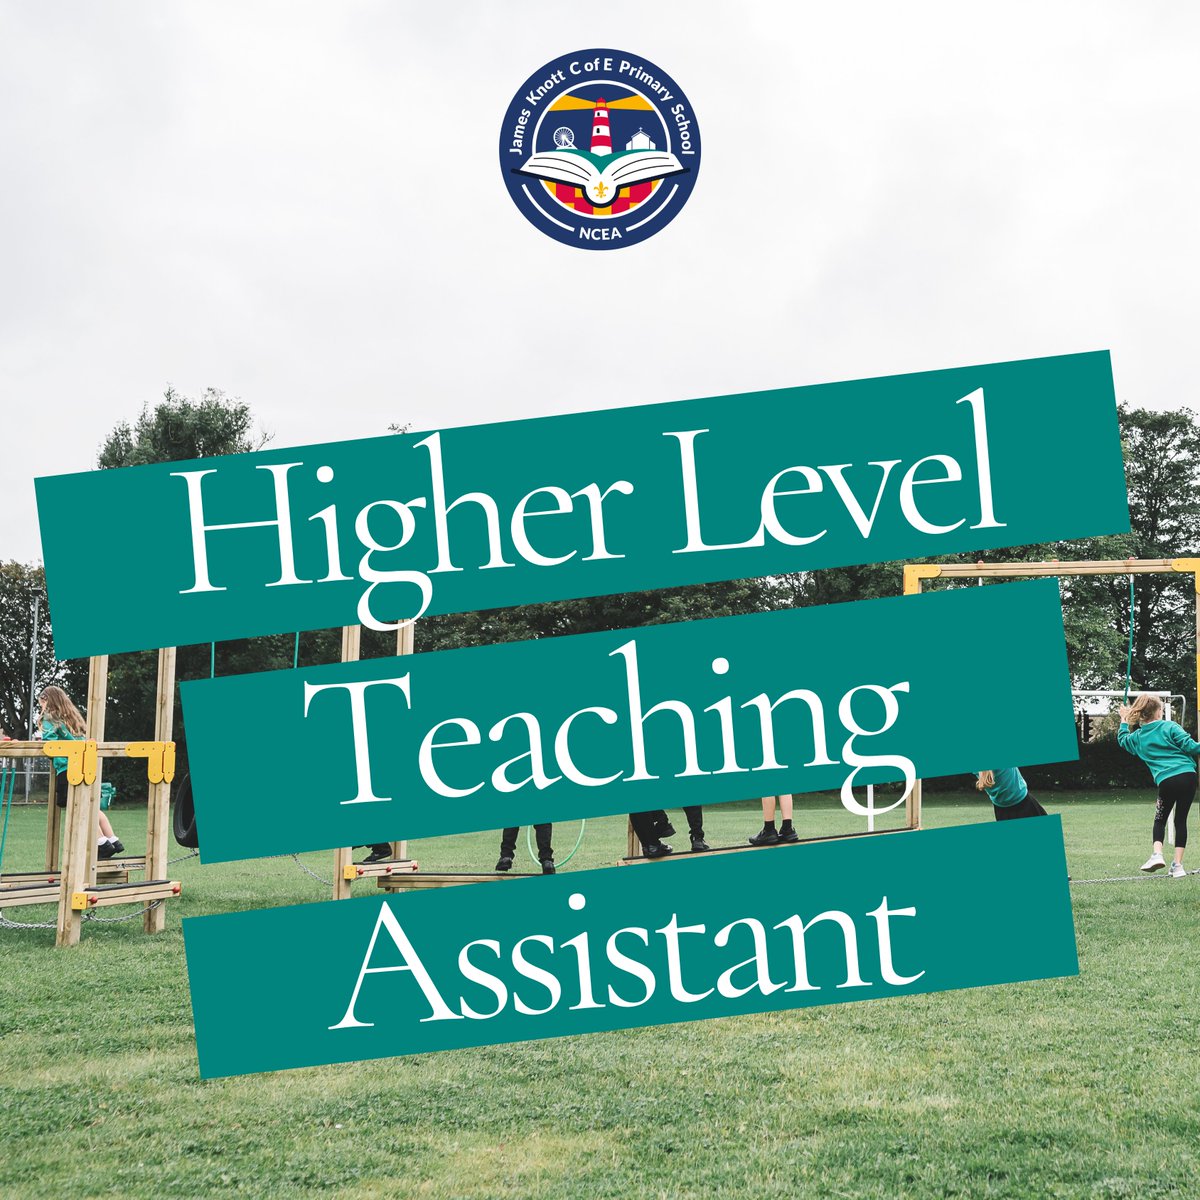 📢New Vacancy📢 We have a fantastic opportunity for a Higher Level Teaching Assistant to join the team at @NCEA_JamesKnott If this sounds like the perfect opportunity for you, apply now - ncea.org.uk/higher-level-t… #Hiring #HLTA #HigherLevelTeachingAssistant #PrimarySchool